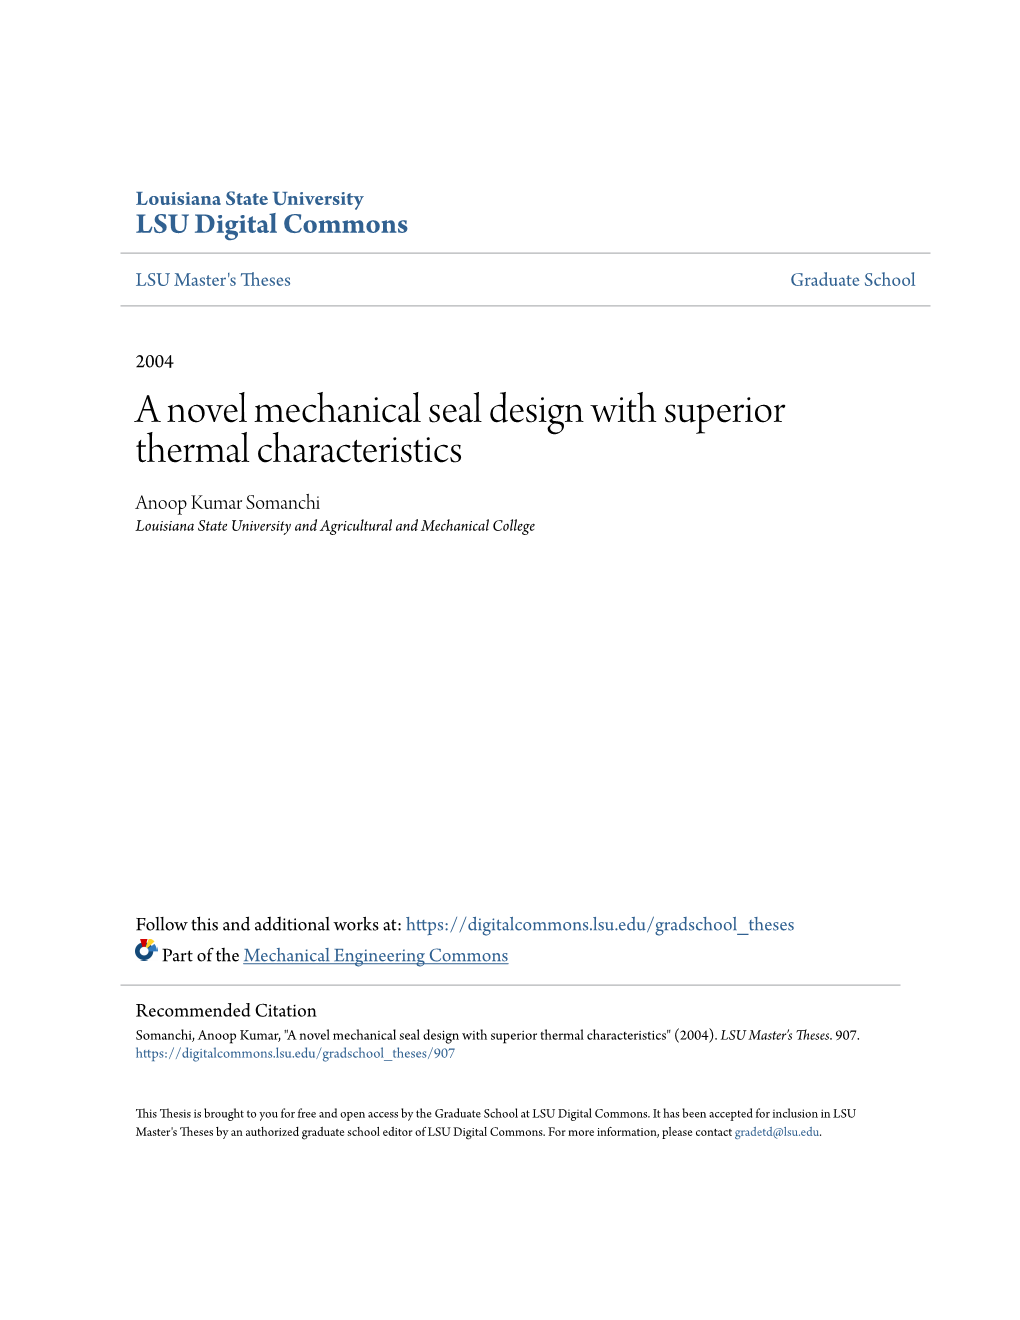 A Novel Mechanical Seal Design with Superior Thermal Characteristics Anoop Kumar Somanchi Louisiana State University and Agricultural and Mechanical College